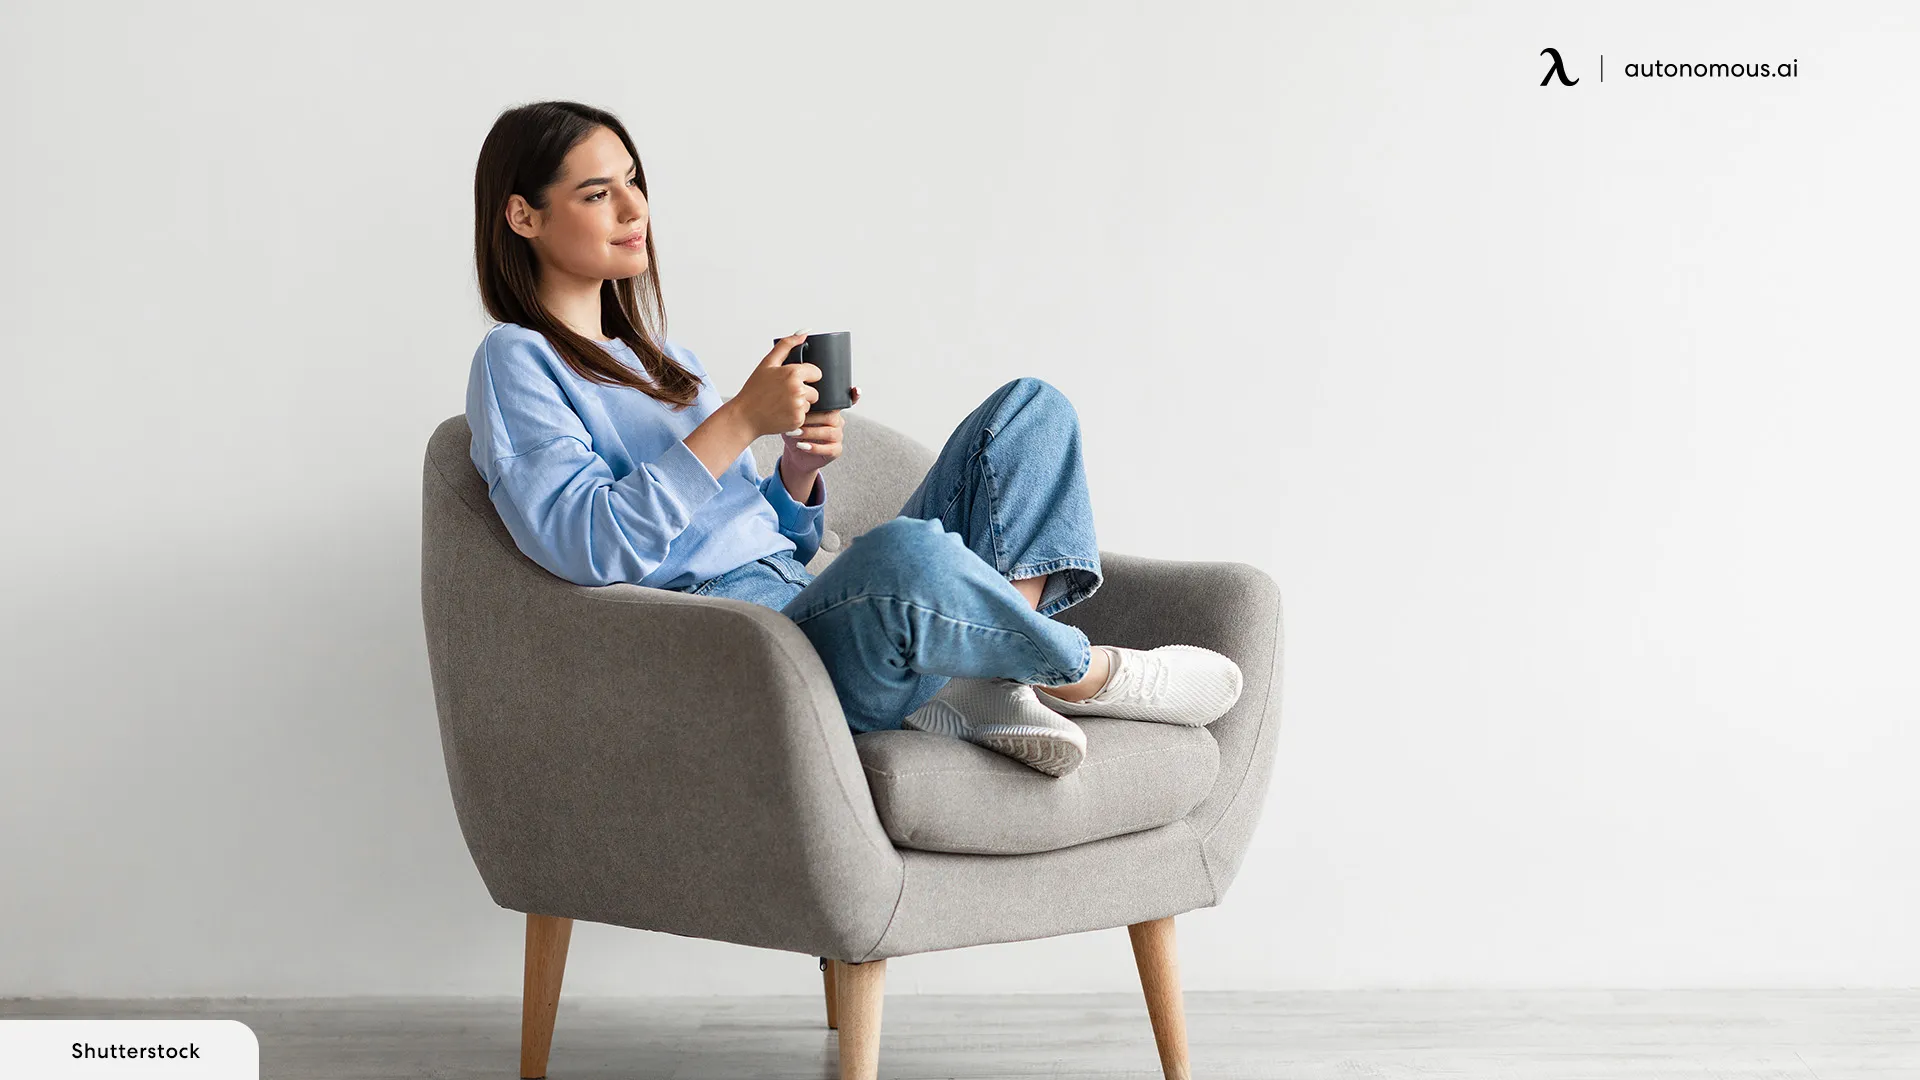 ADHD Behavior on Adults: Sitting With Legs Up On Chair